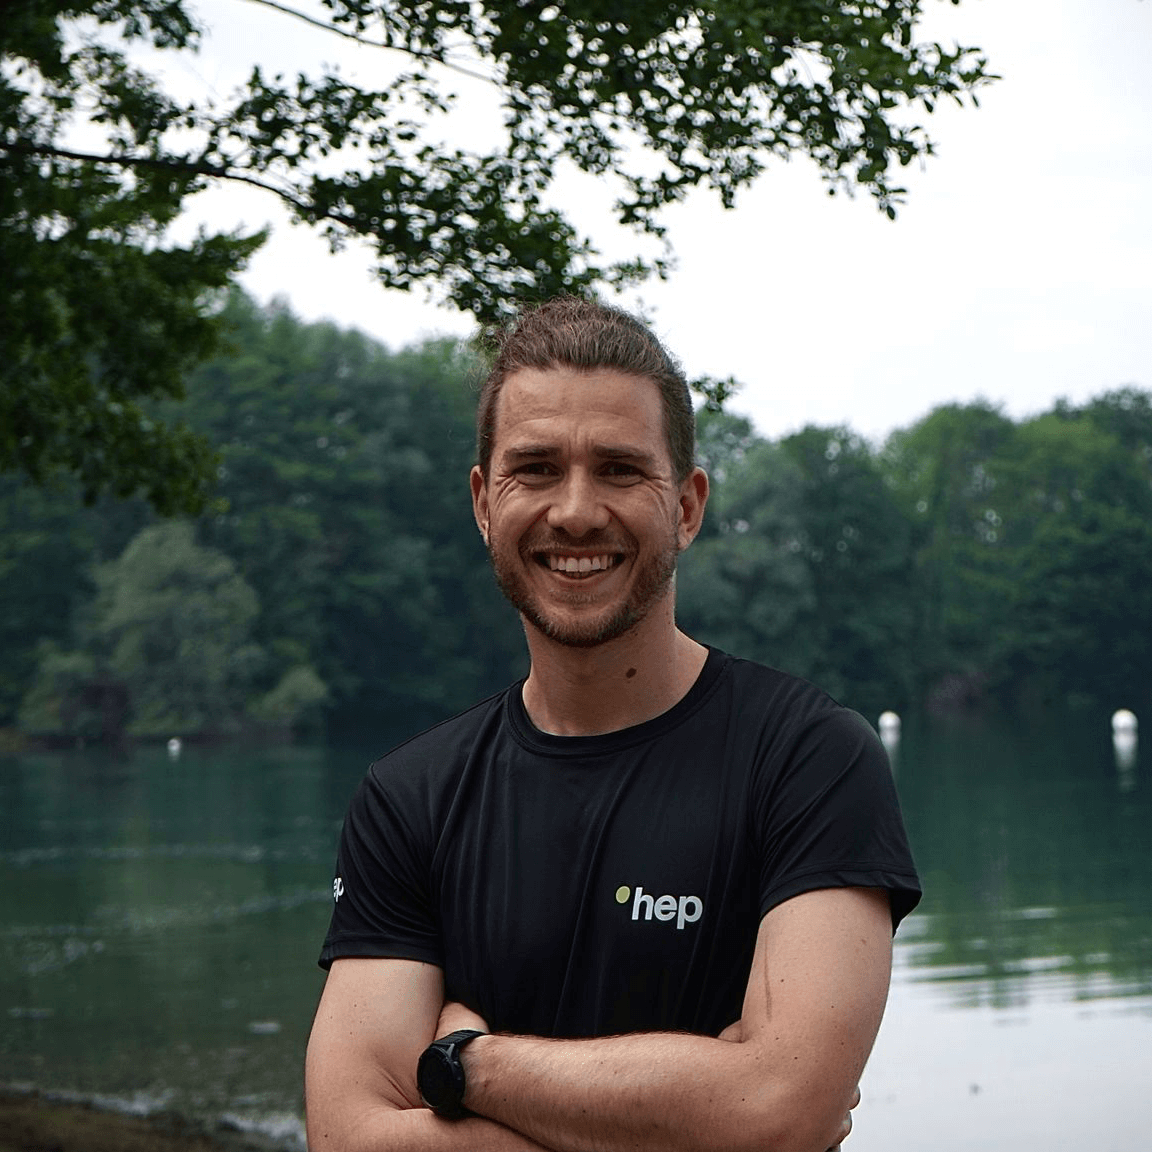 Profile picture of a smiling man, lake in the background